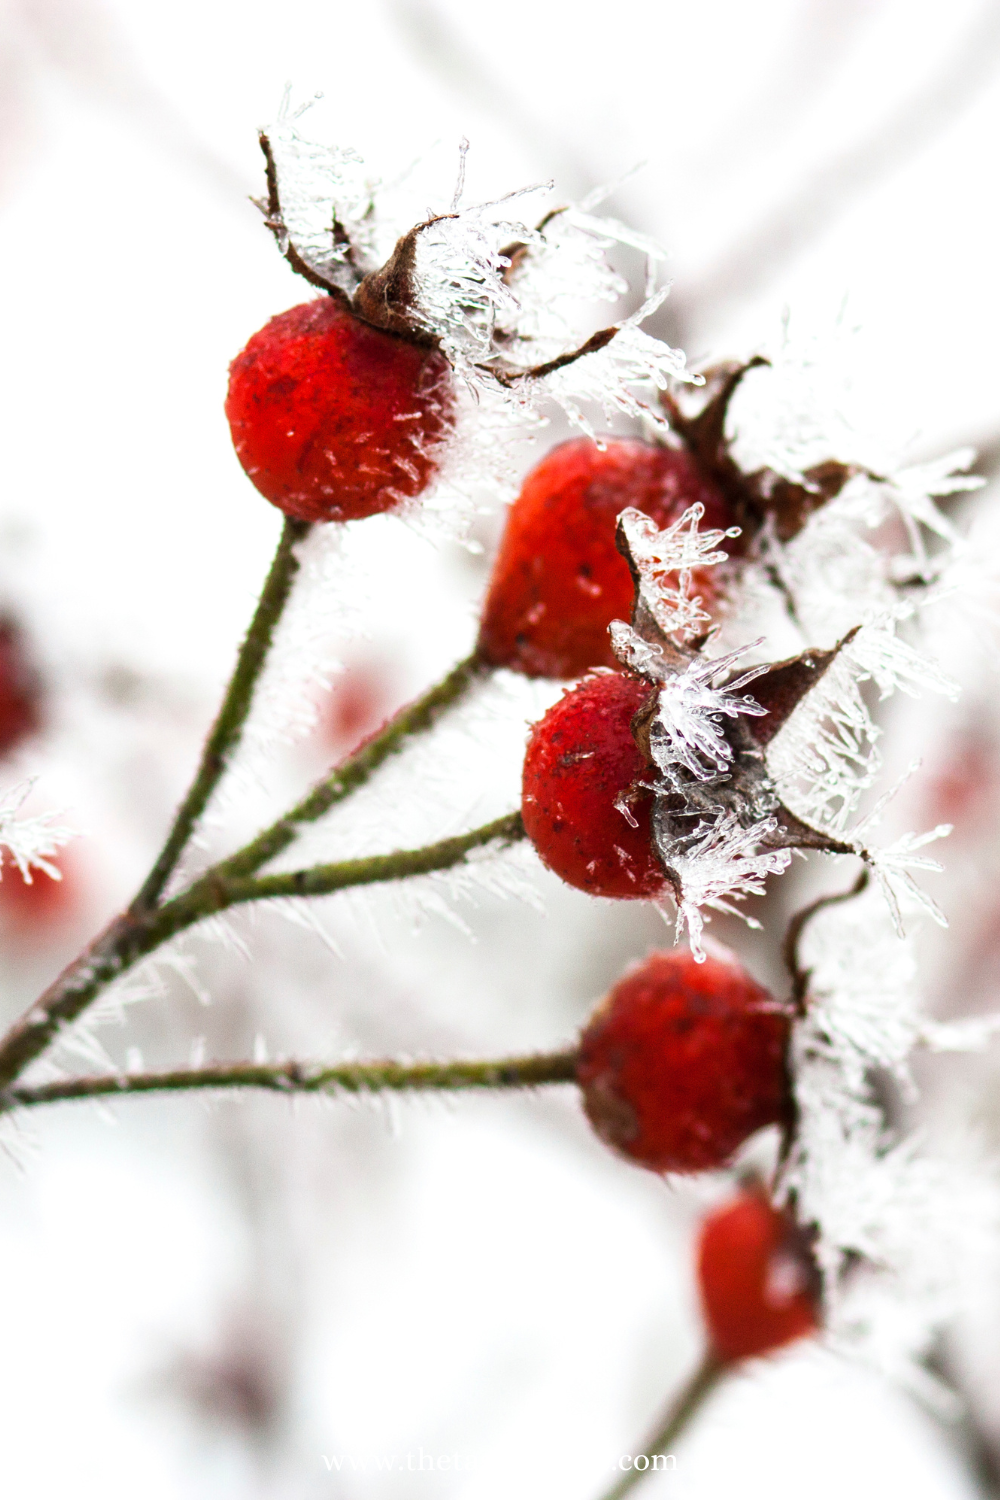 What To Forage In Winter: Winter Guide to Edible Plants